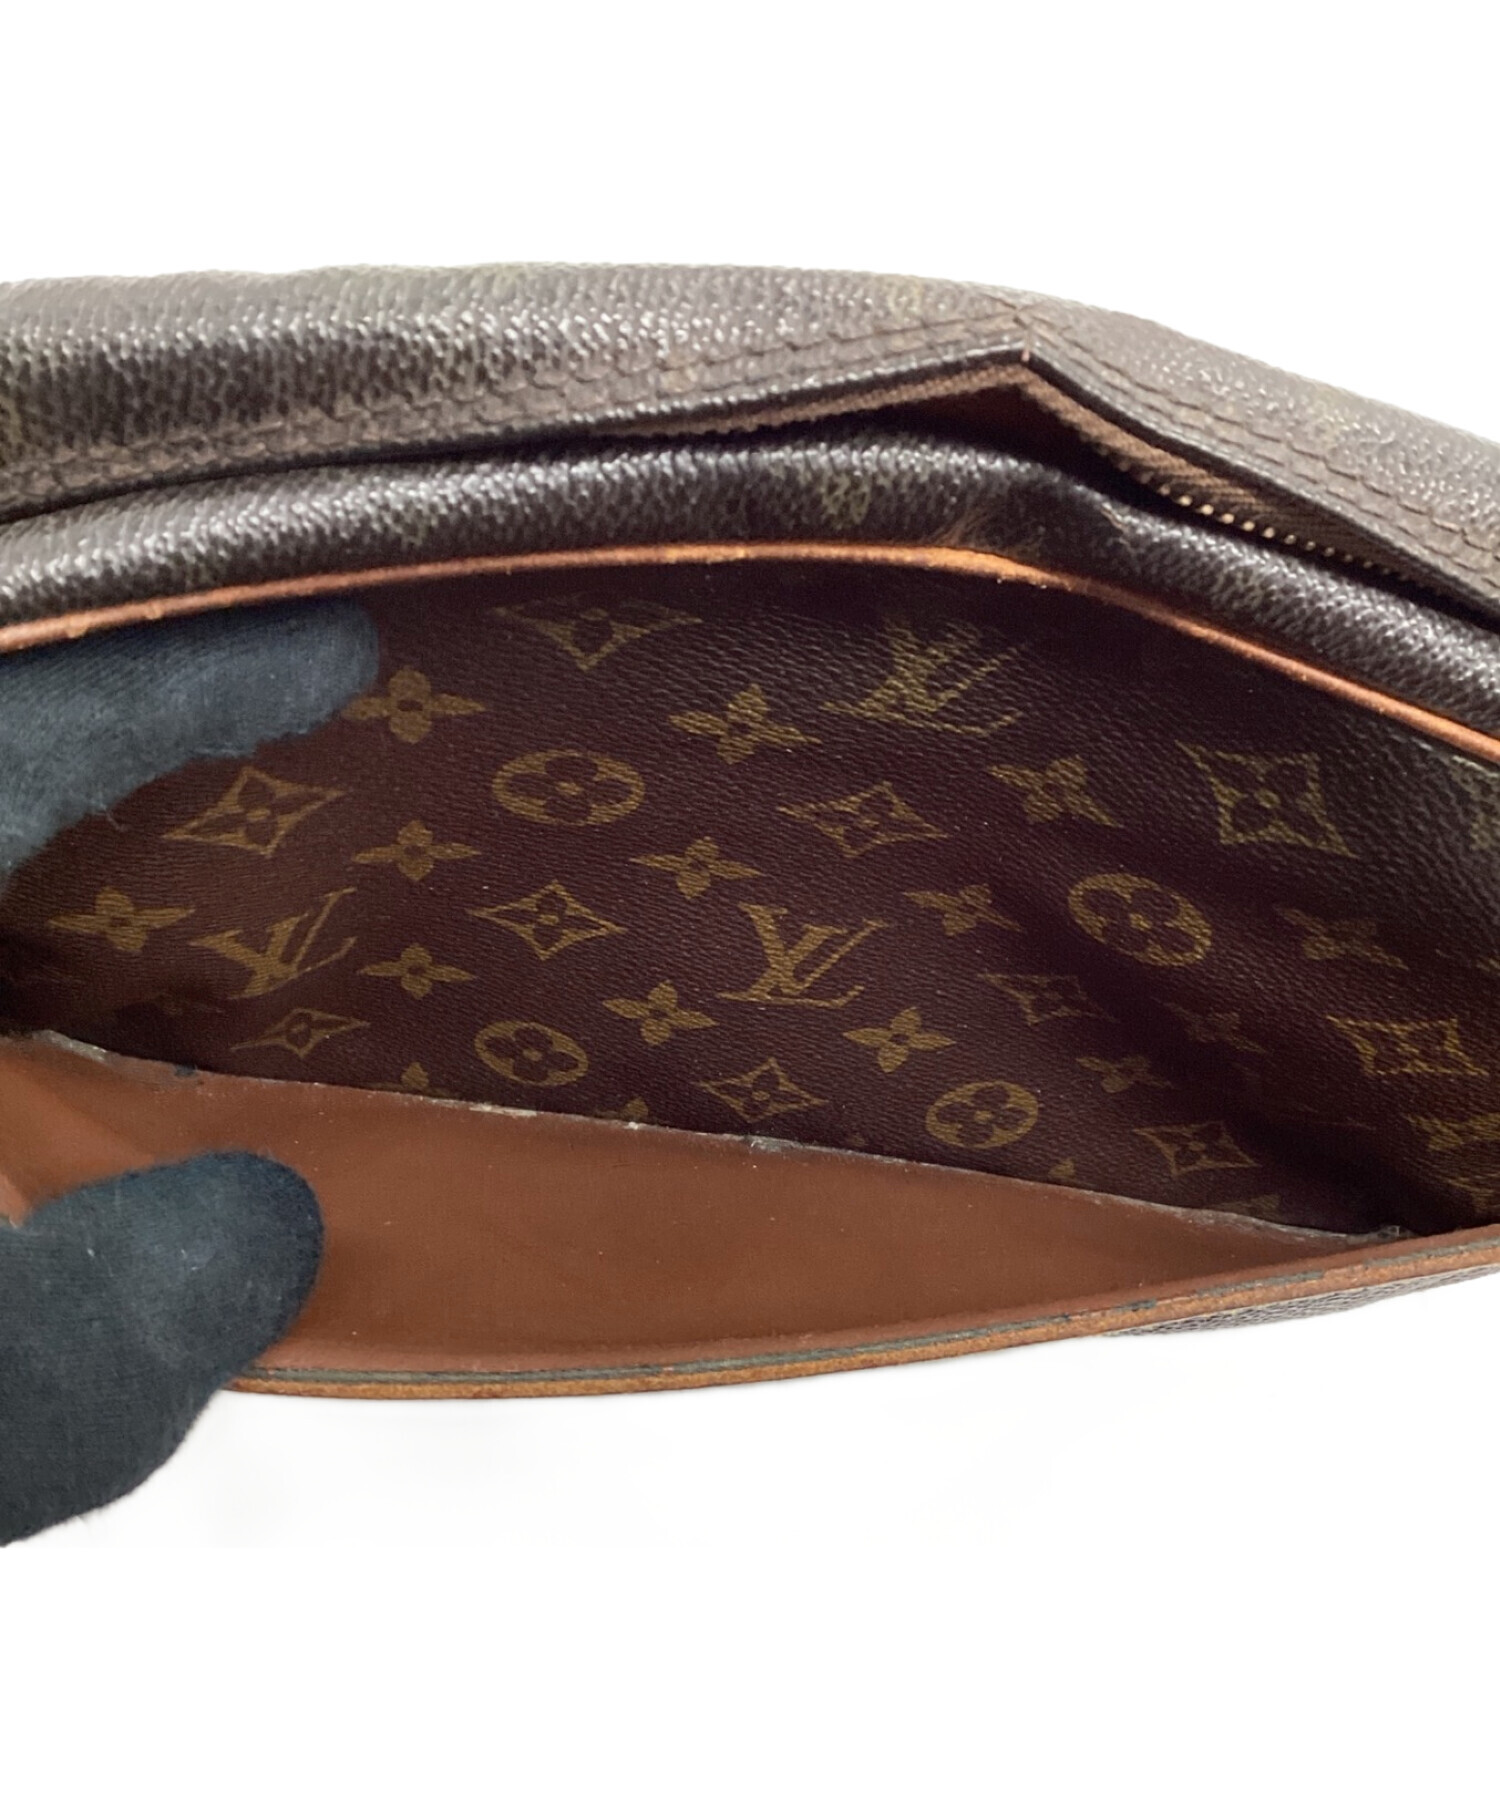 LOUIS VUITTON (ルイ ヴィトン) コンピエーニュ28